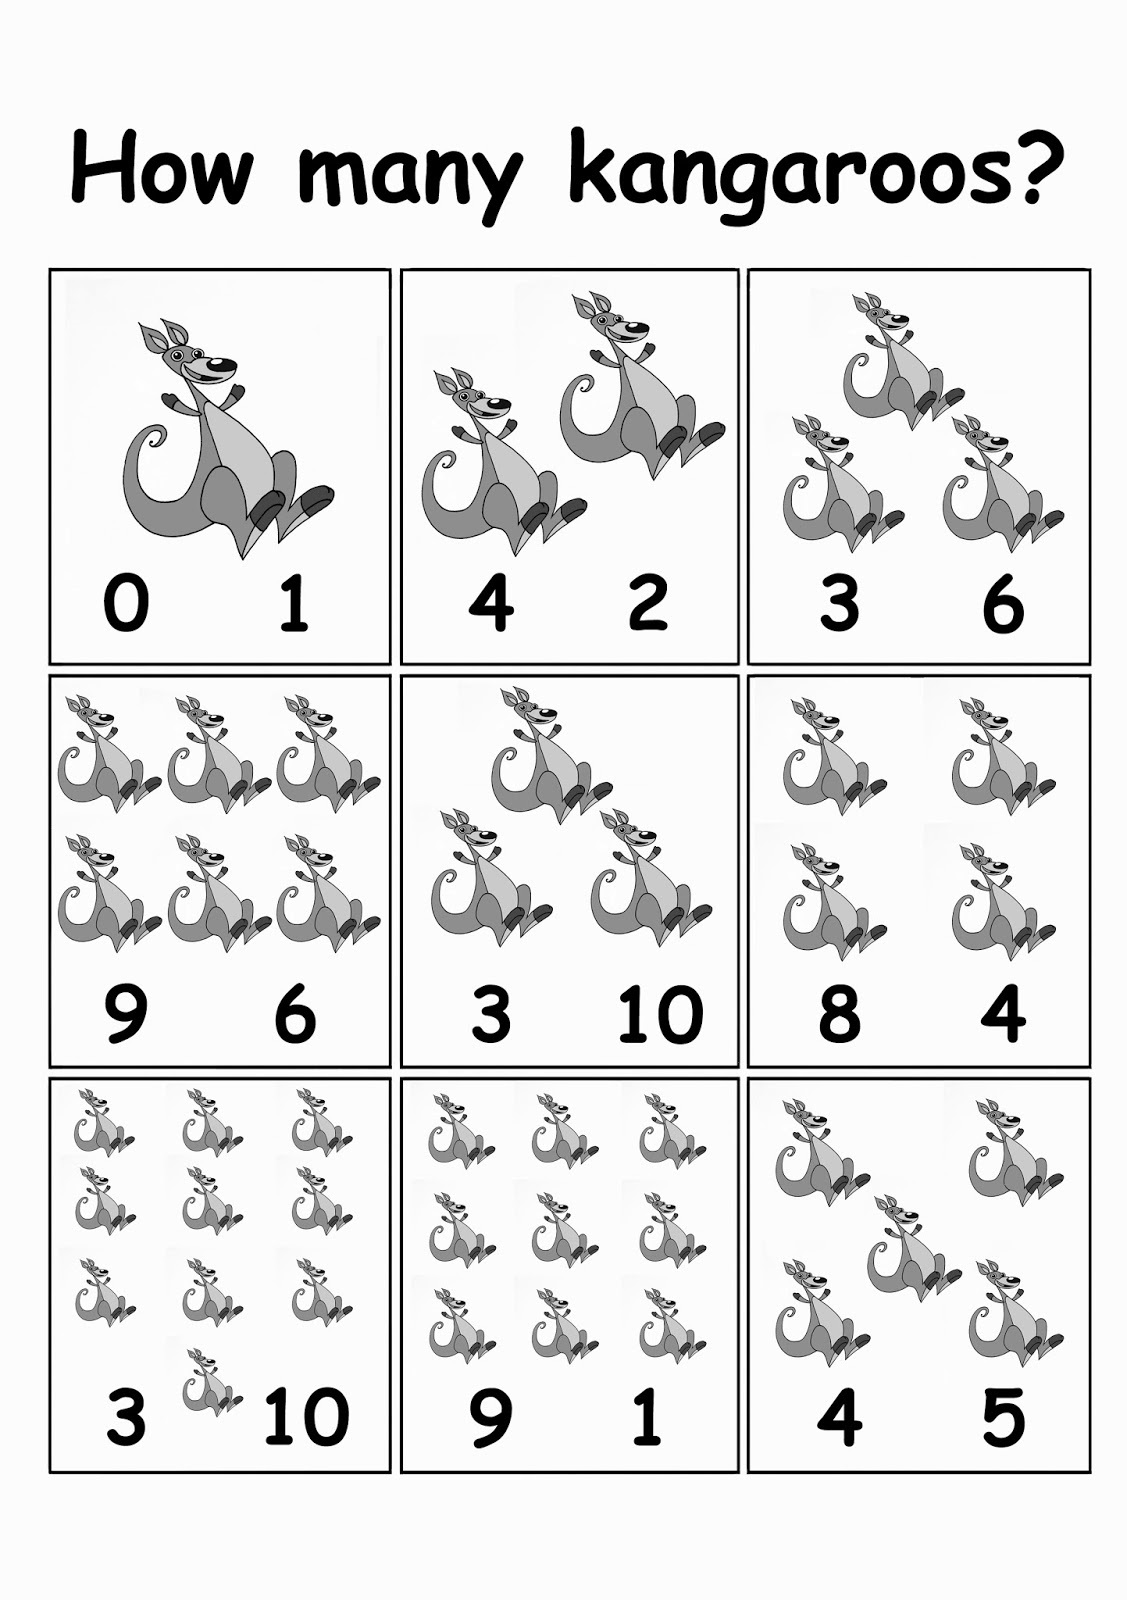 children's activity sheets to print counting